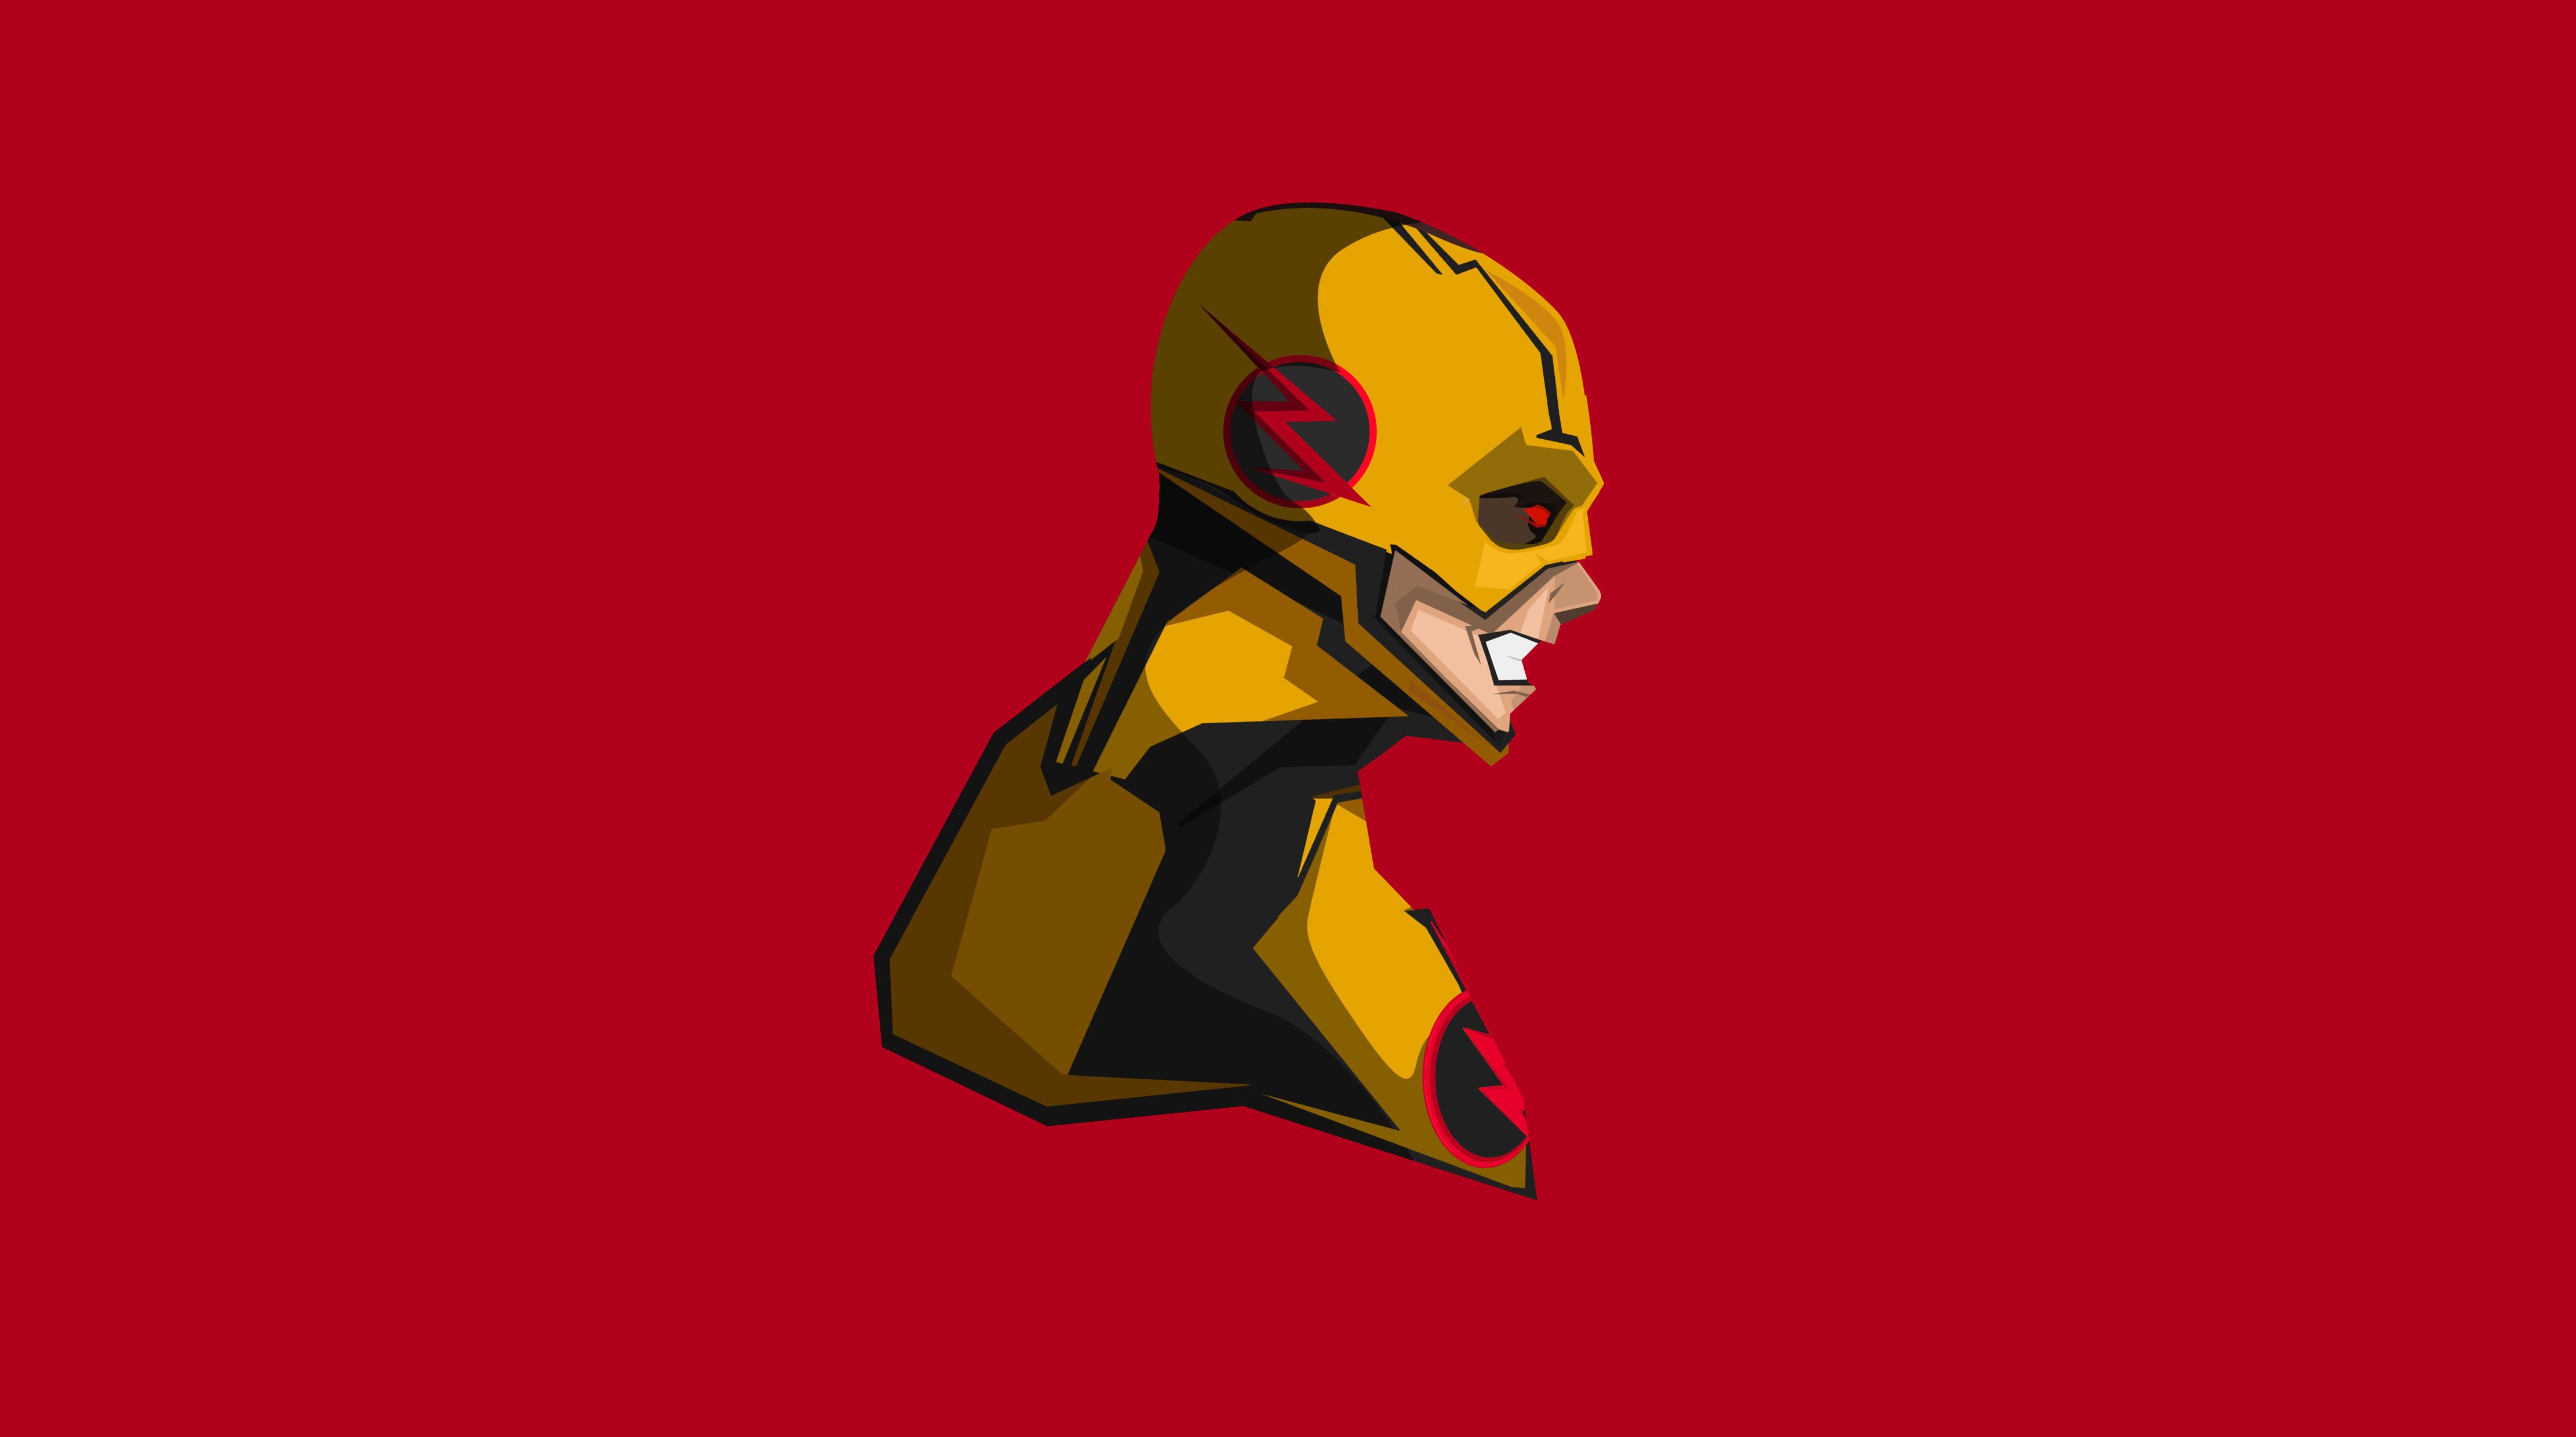 Reverse Flash 4K Minimalism, HD Superheroes, 4k Wallpaper, Image, Background, Photo and Picture